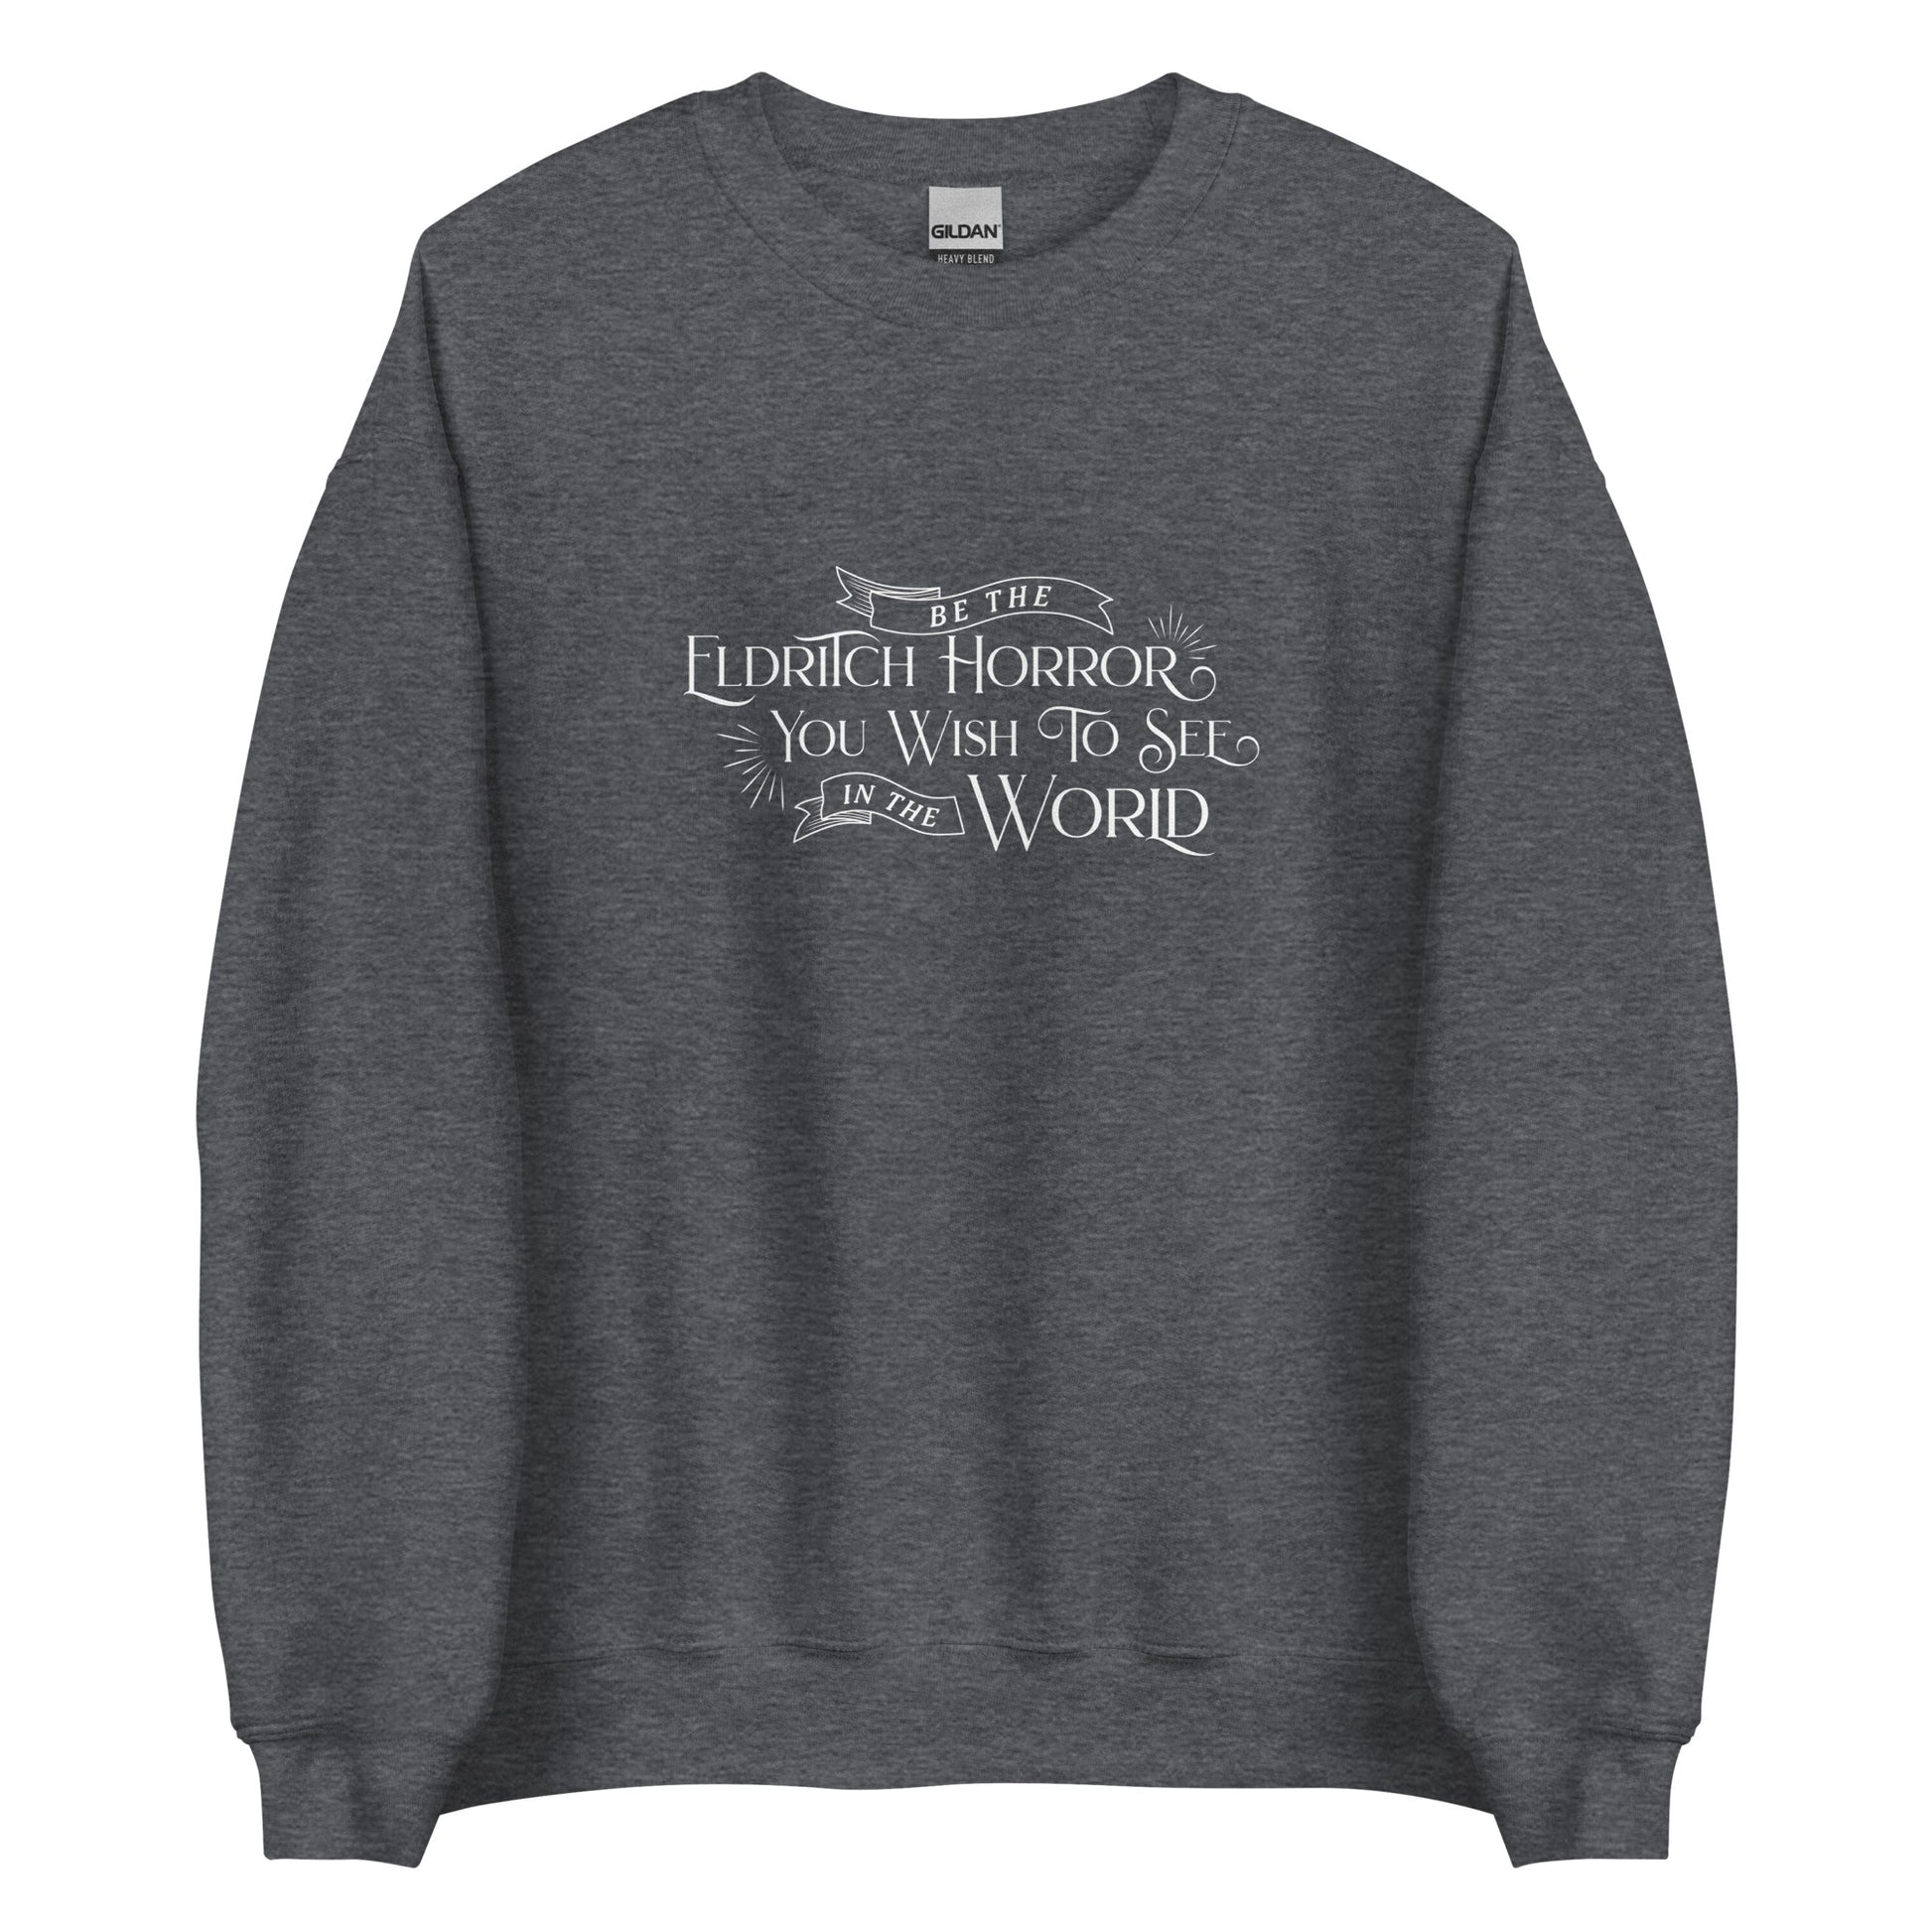 A dark heather grey crewneck sweatshirt with white old-fashioned text that reads "Be The Eldritch Horror You Wish To See In The World"